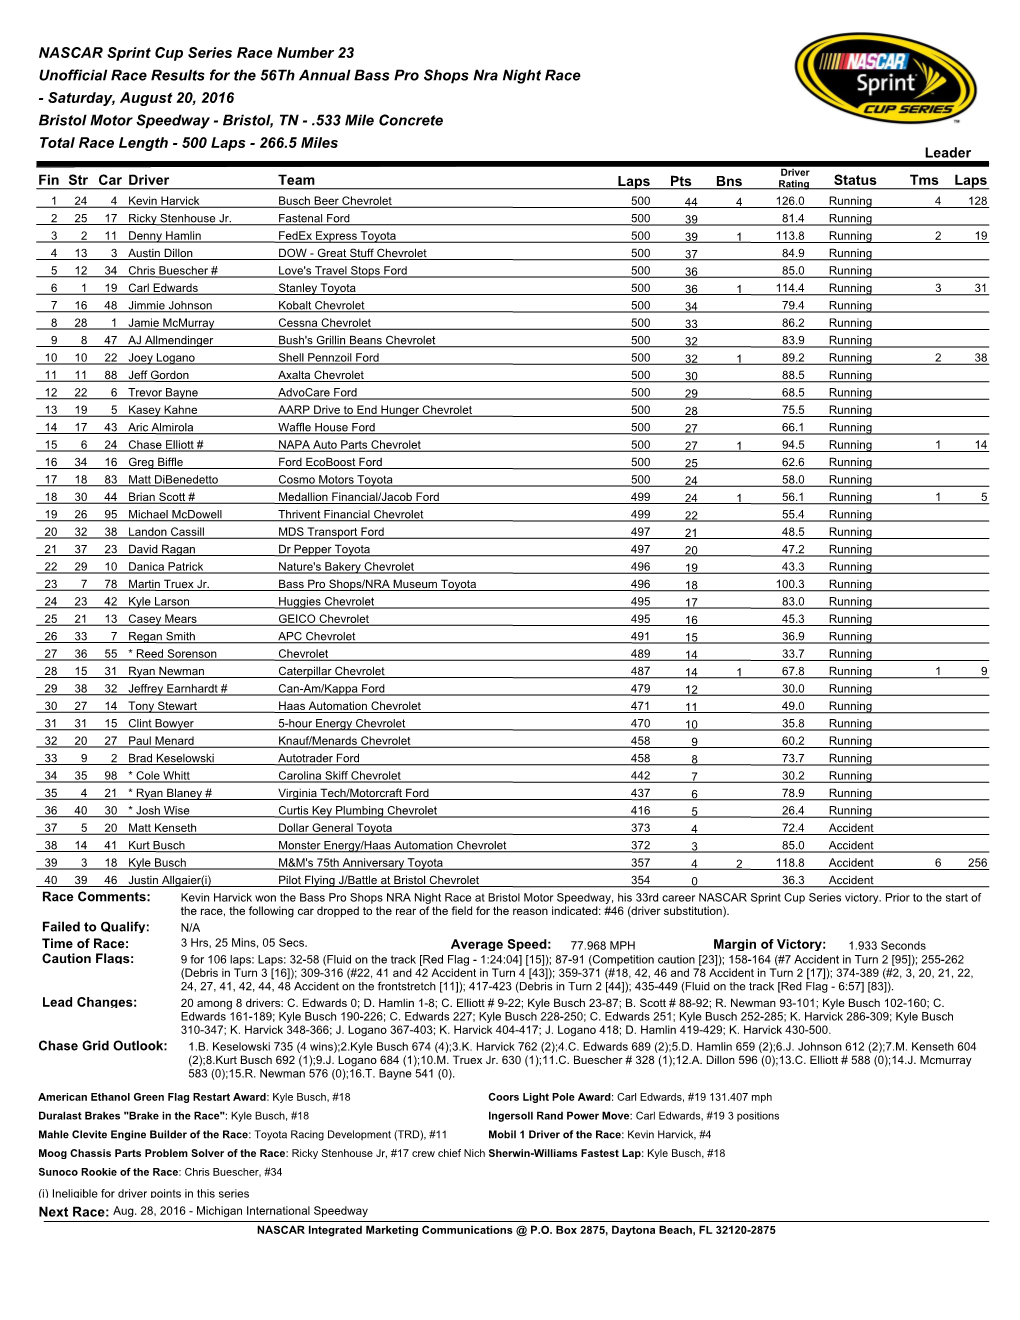 NASCAR Sprint Cup Series Race Number 23 Unofficial Race Results